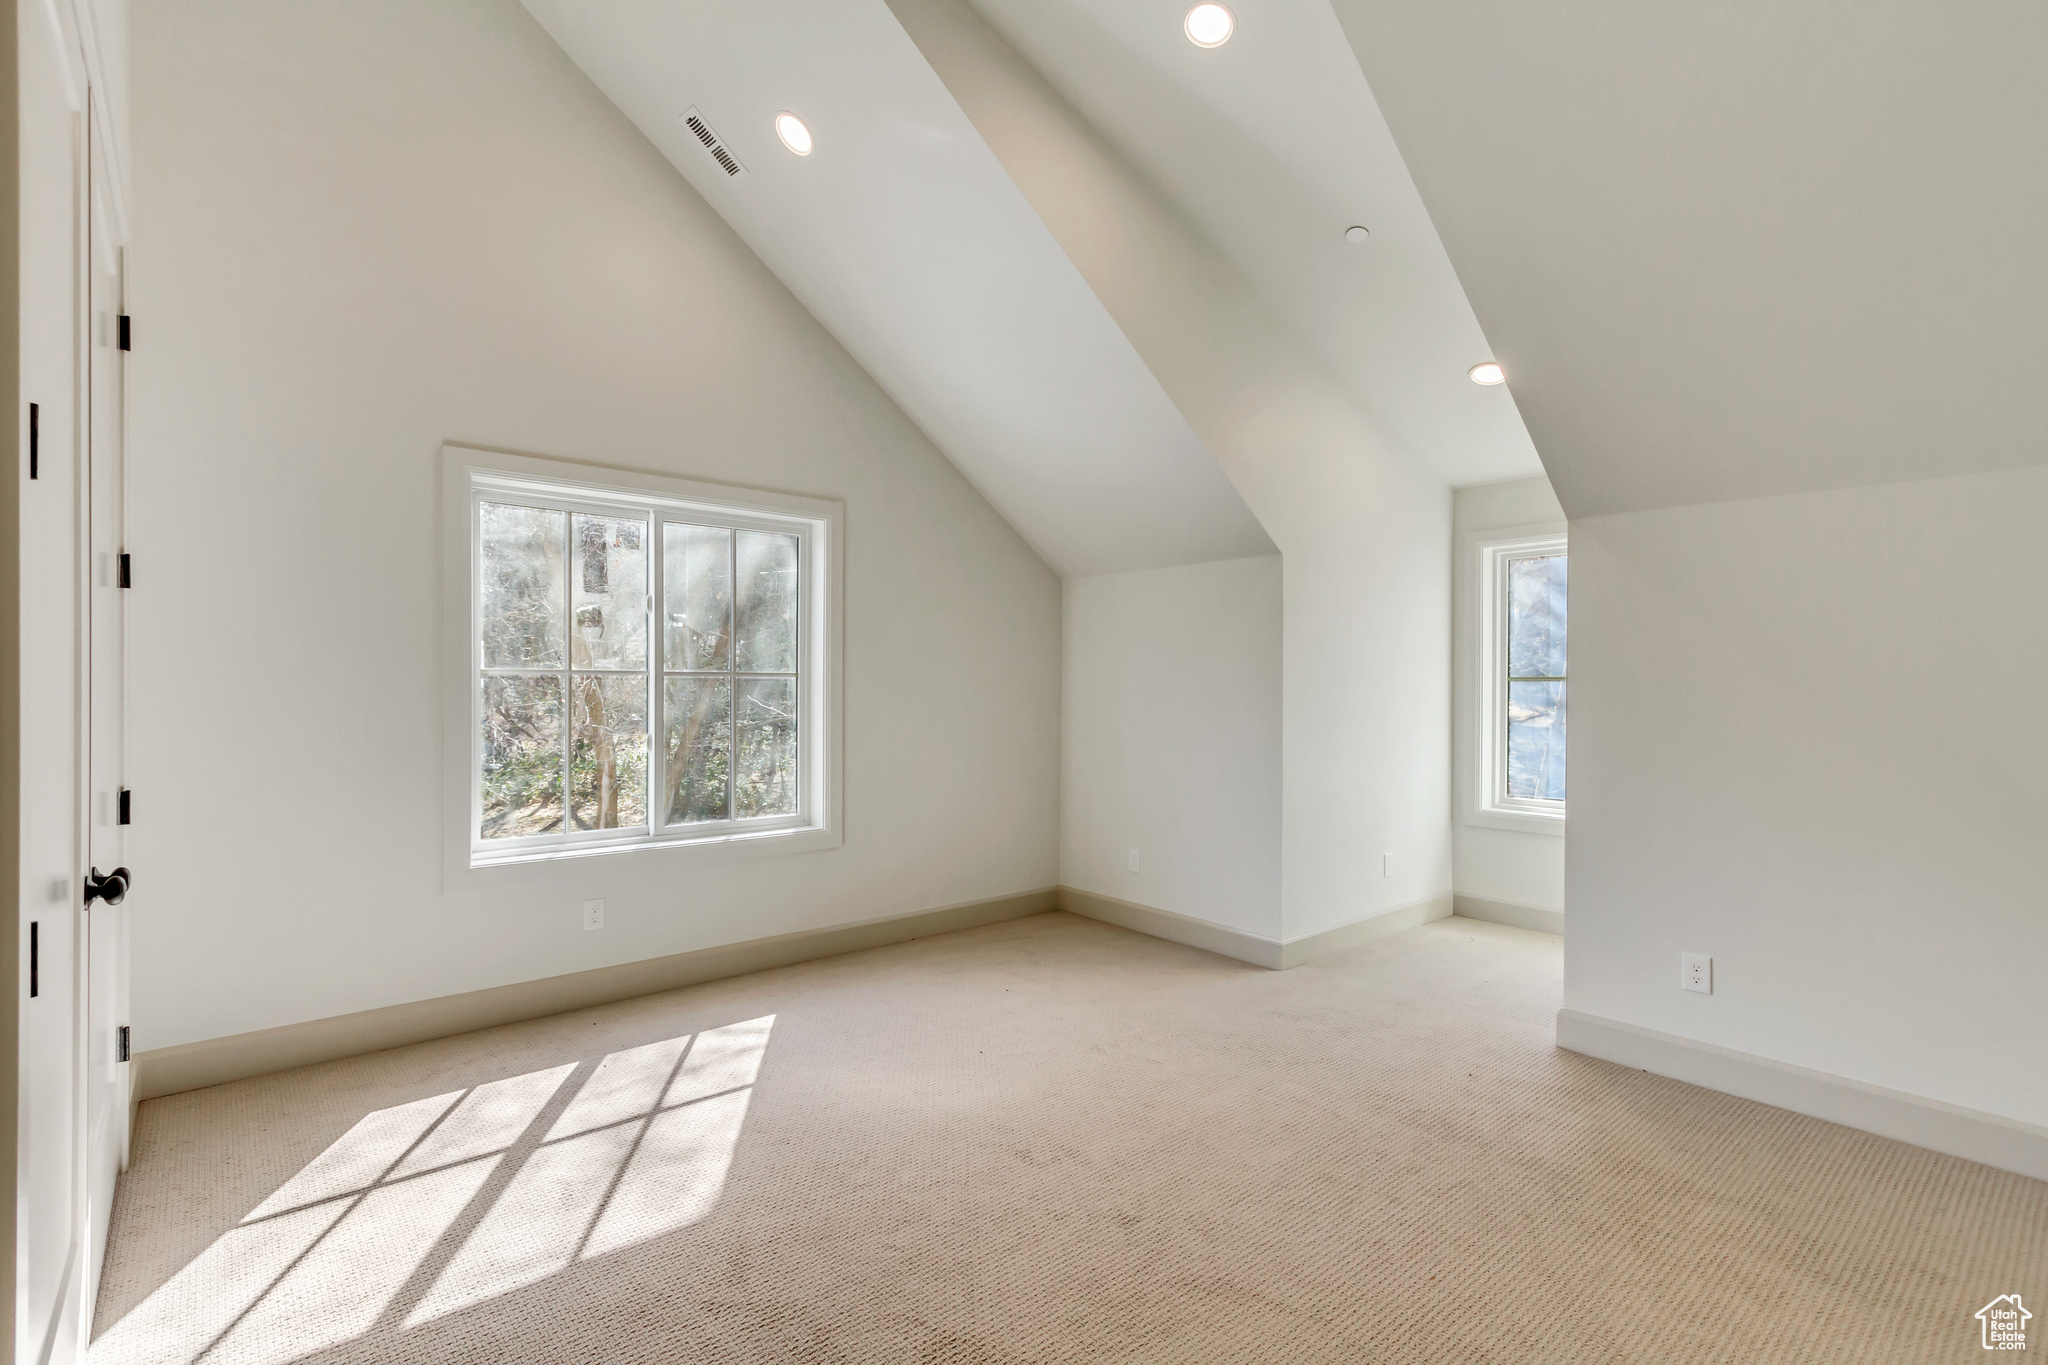 Additional living space featuring light colored carpet and vaulted ceiling